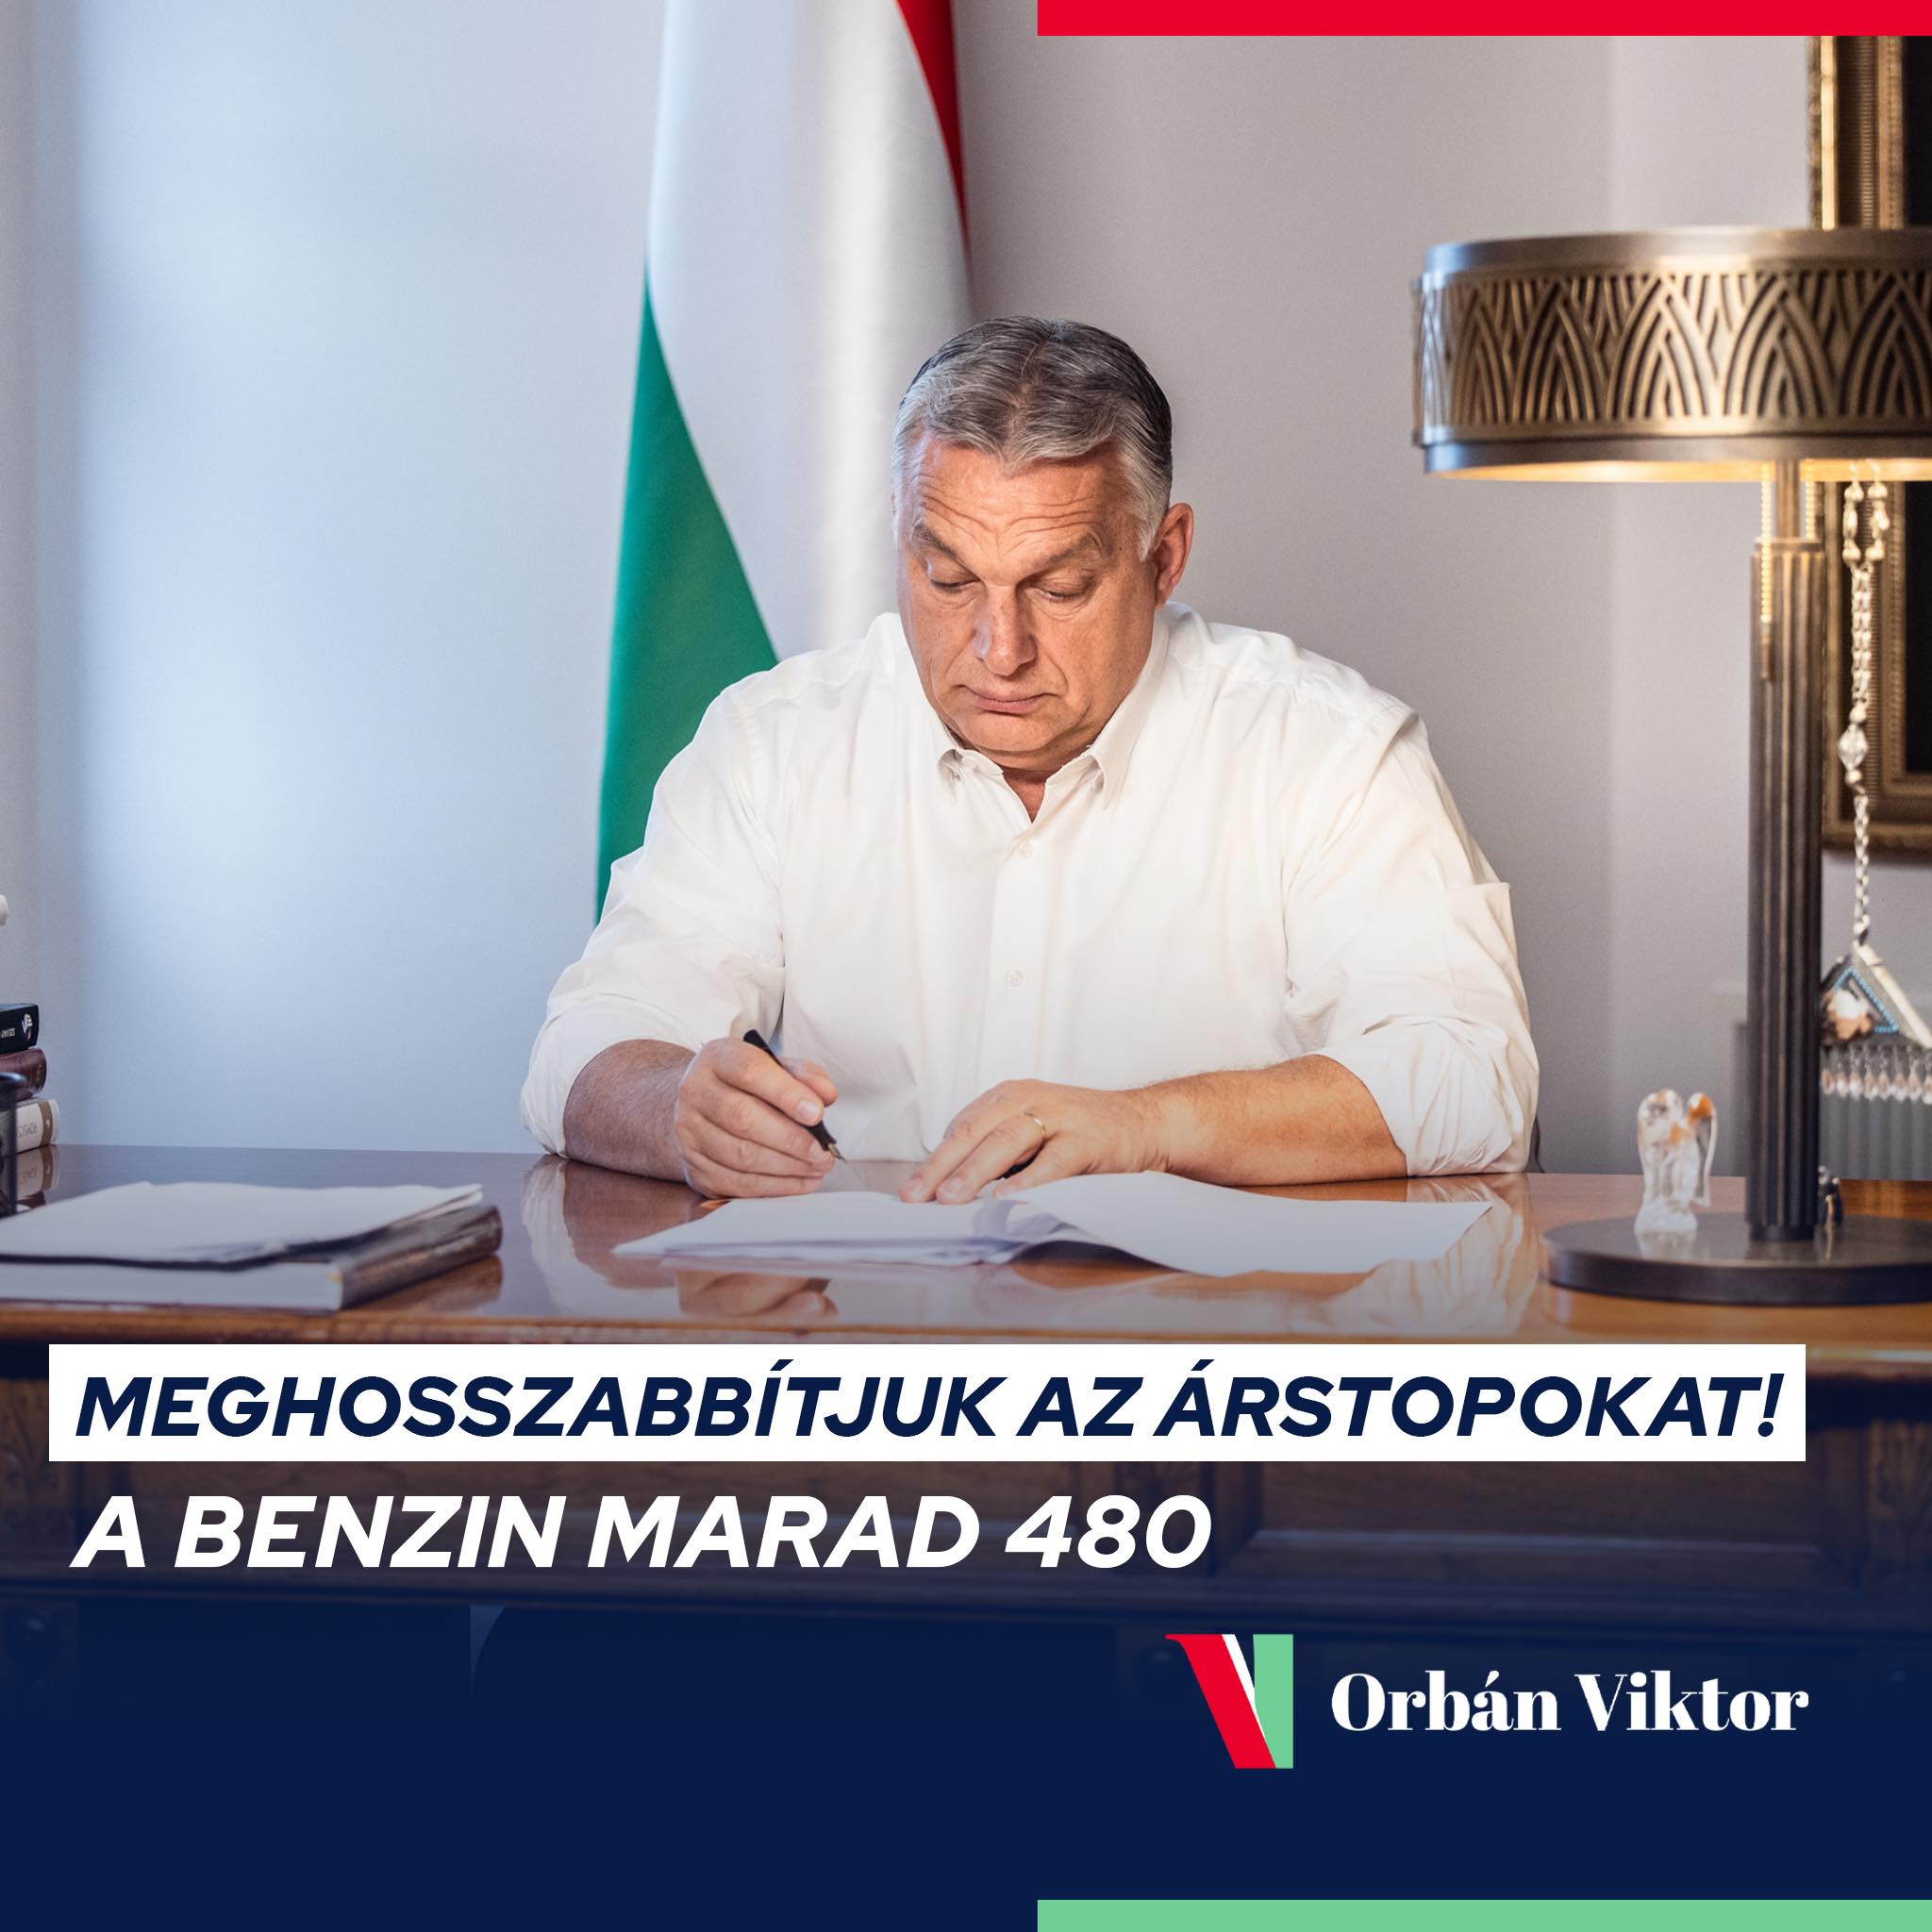 Food & Gas Price Caps Extended + More from Orbán